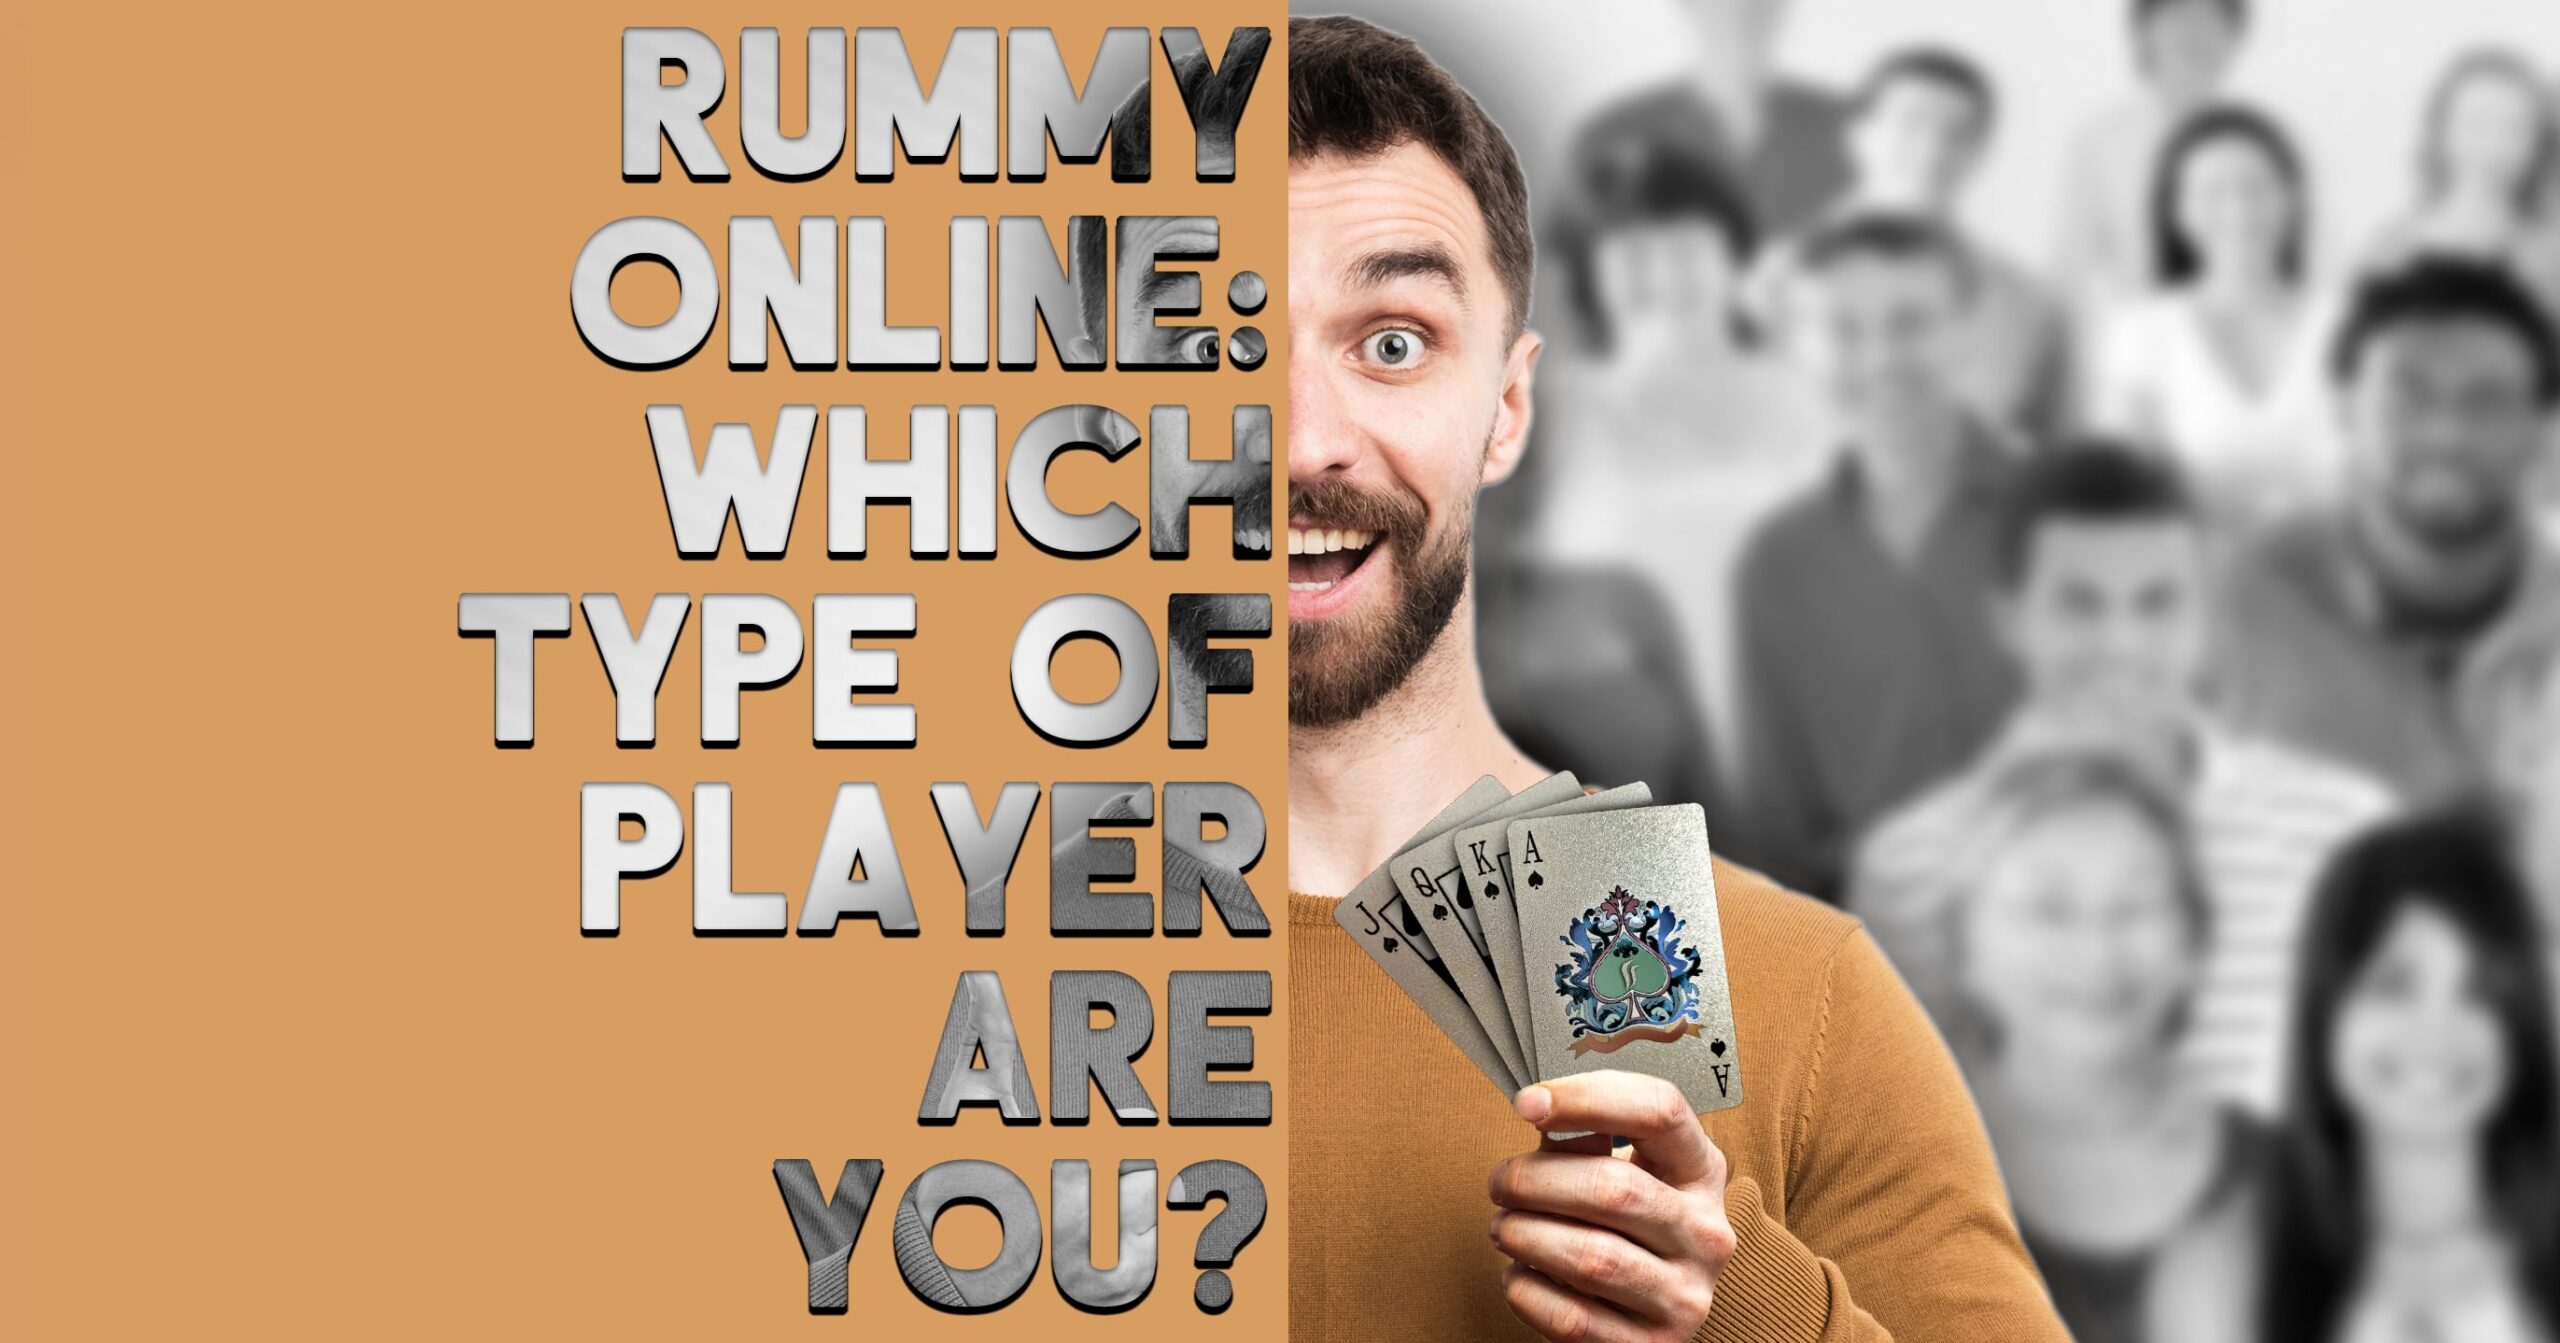 Rummy Online: Which type of player are you?